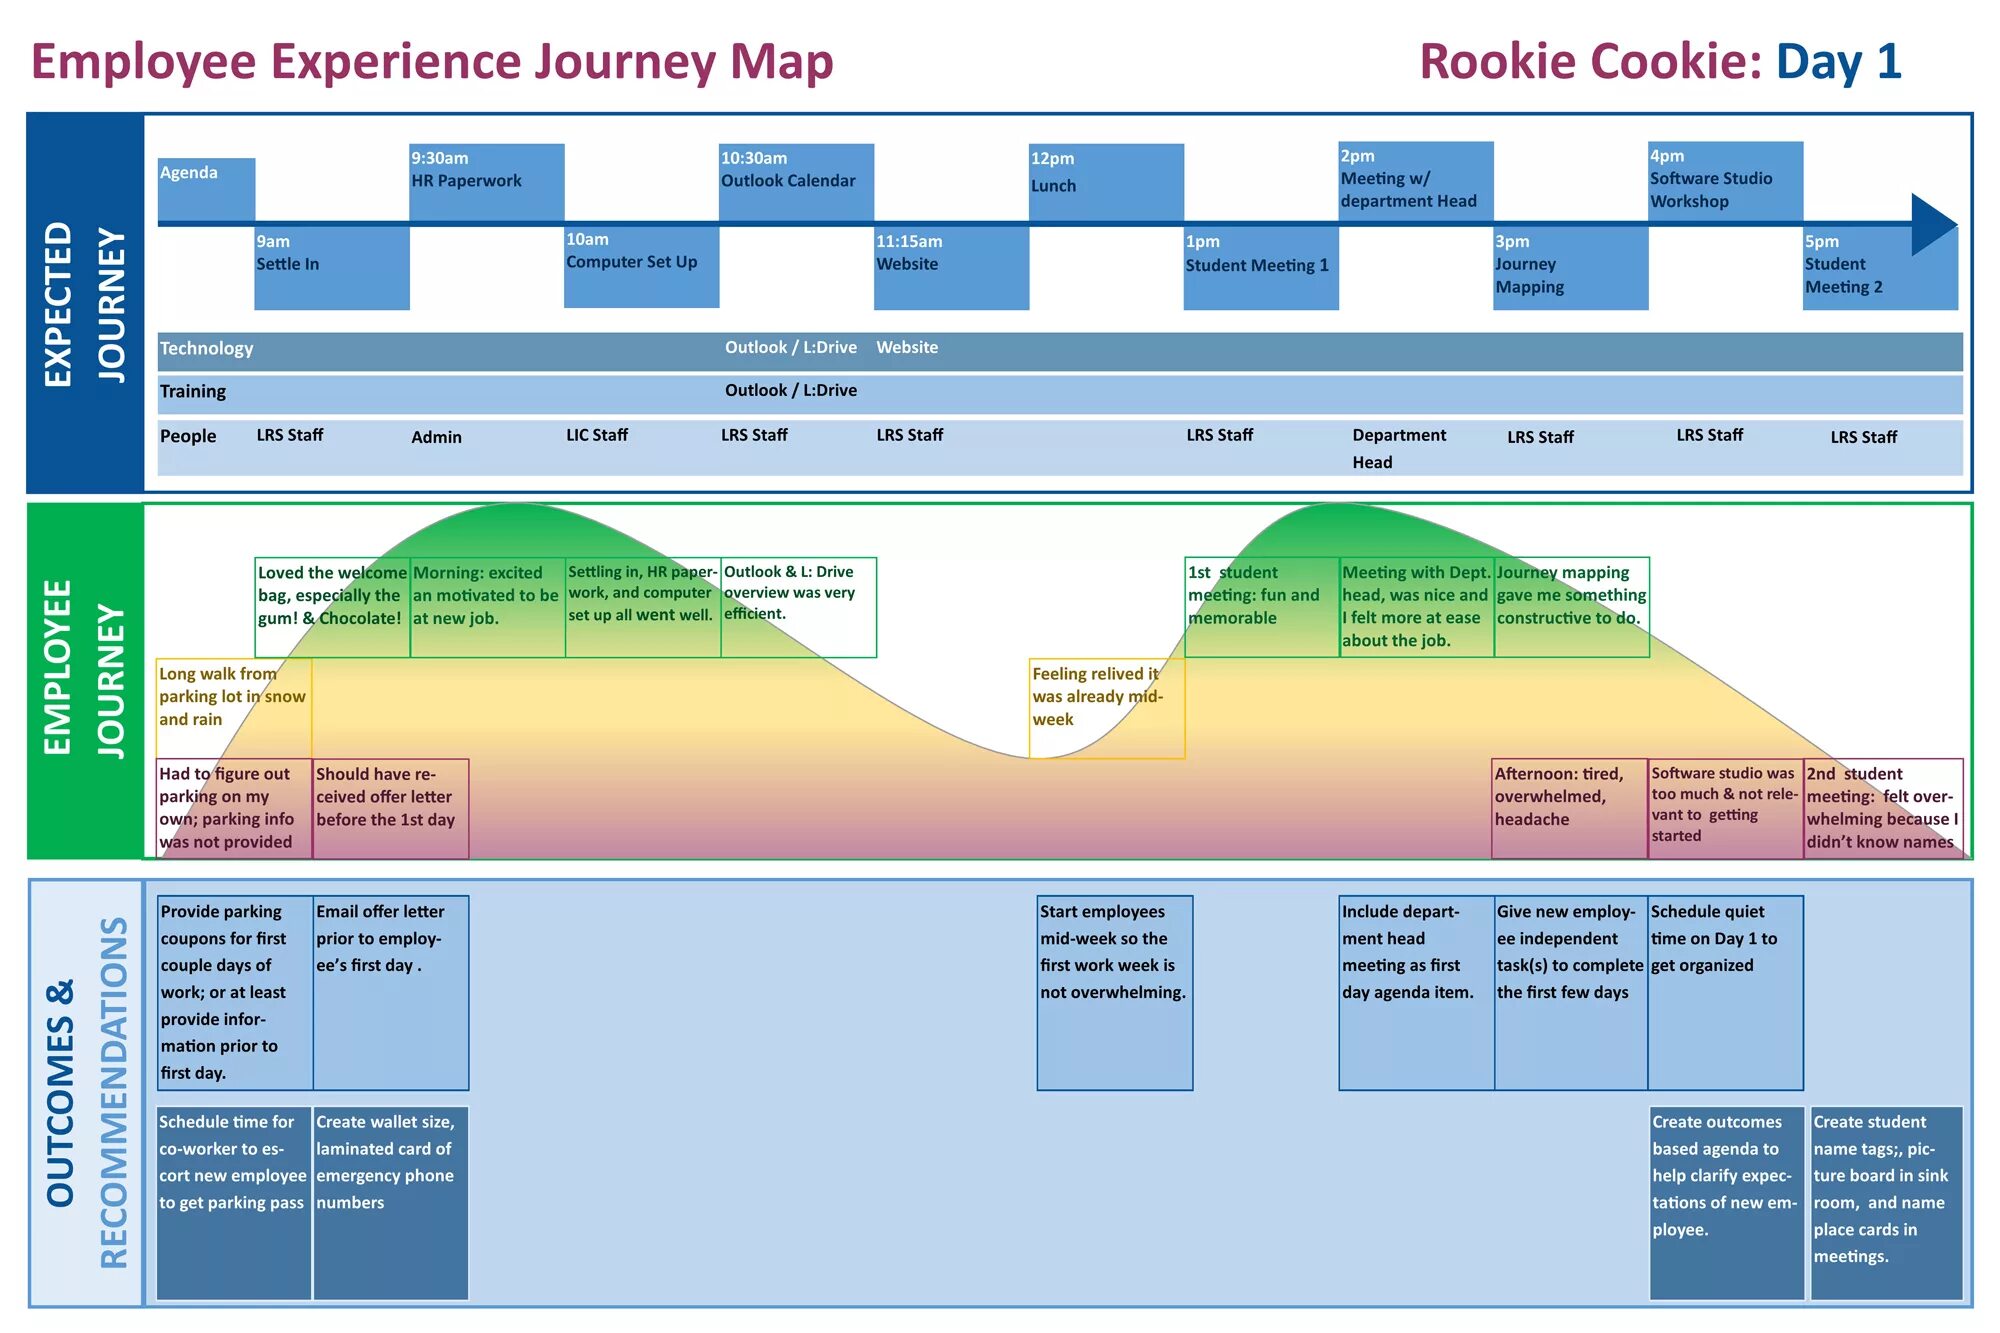 Learning Journey Map примеры. Student Journey Map примеры. Student Learning Journey. Journey Map.